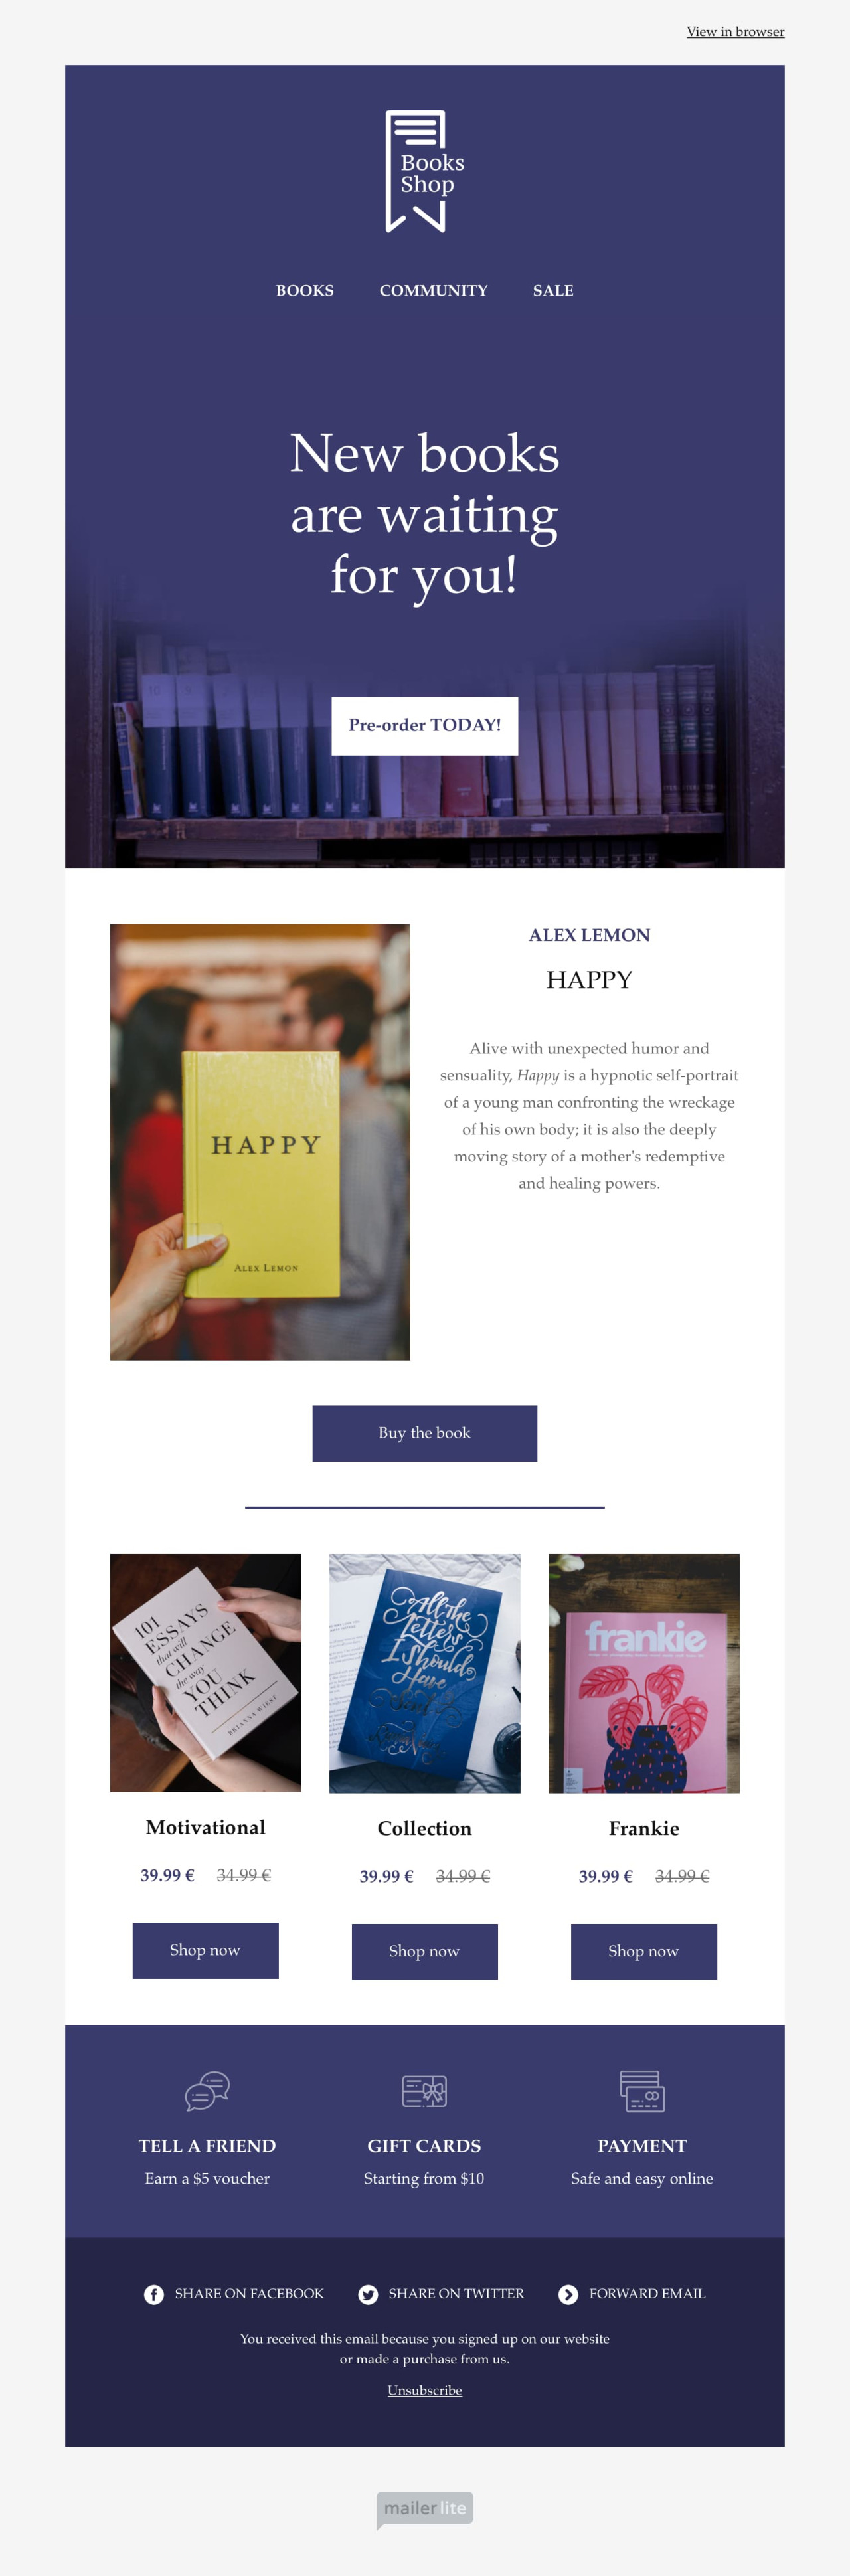 Bookstore email template - Made by MailerLite